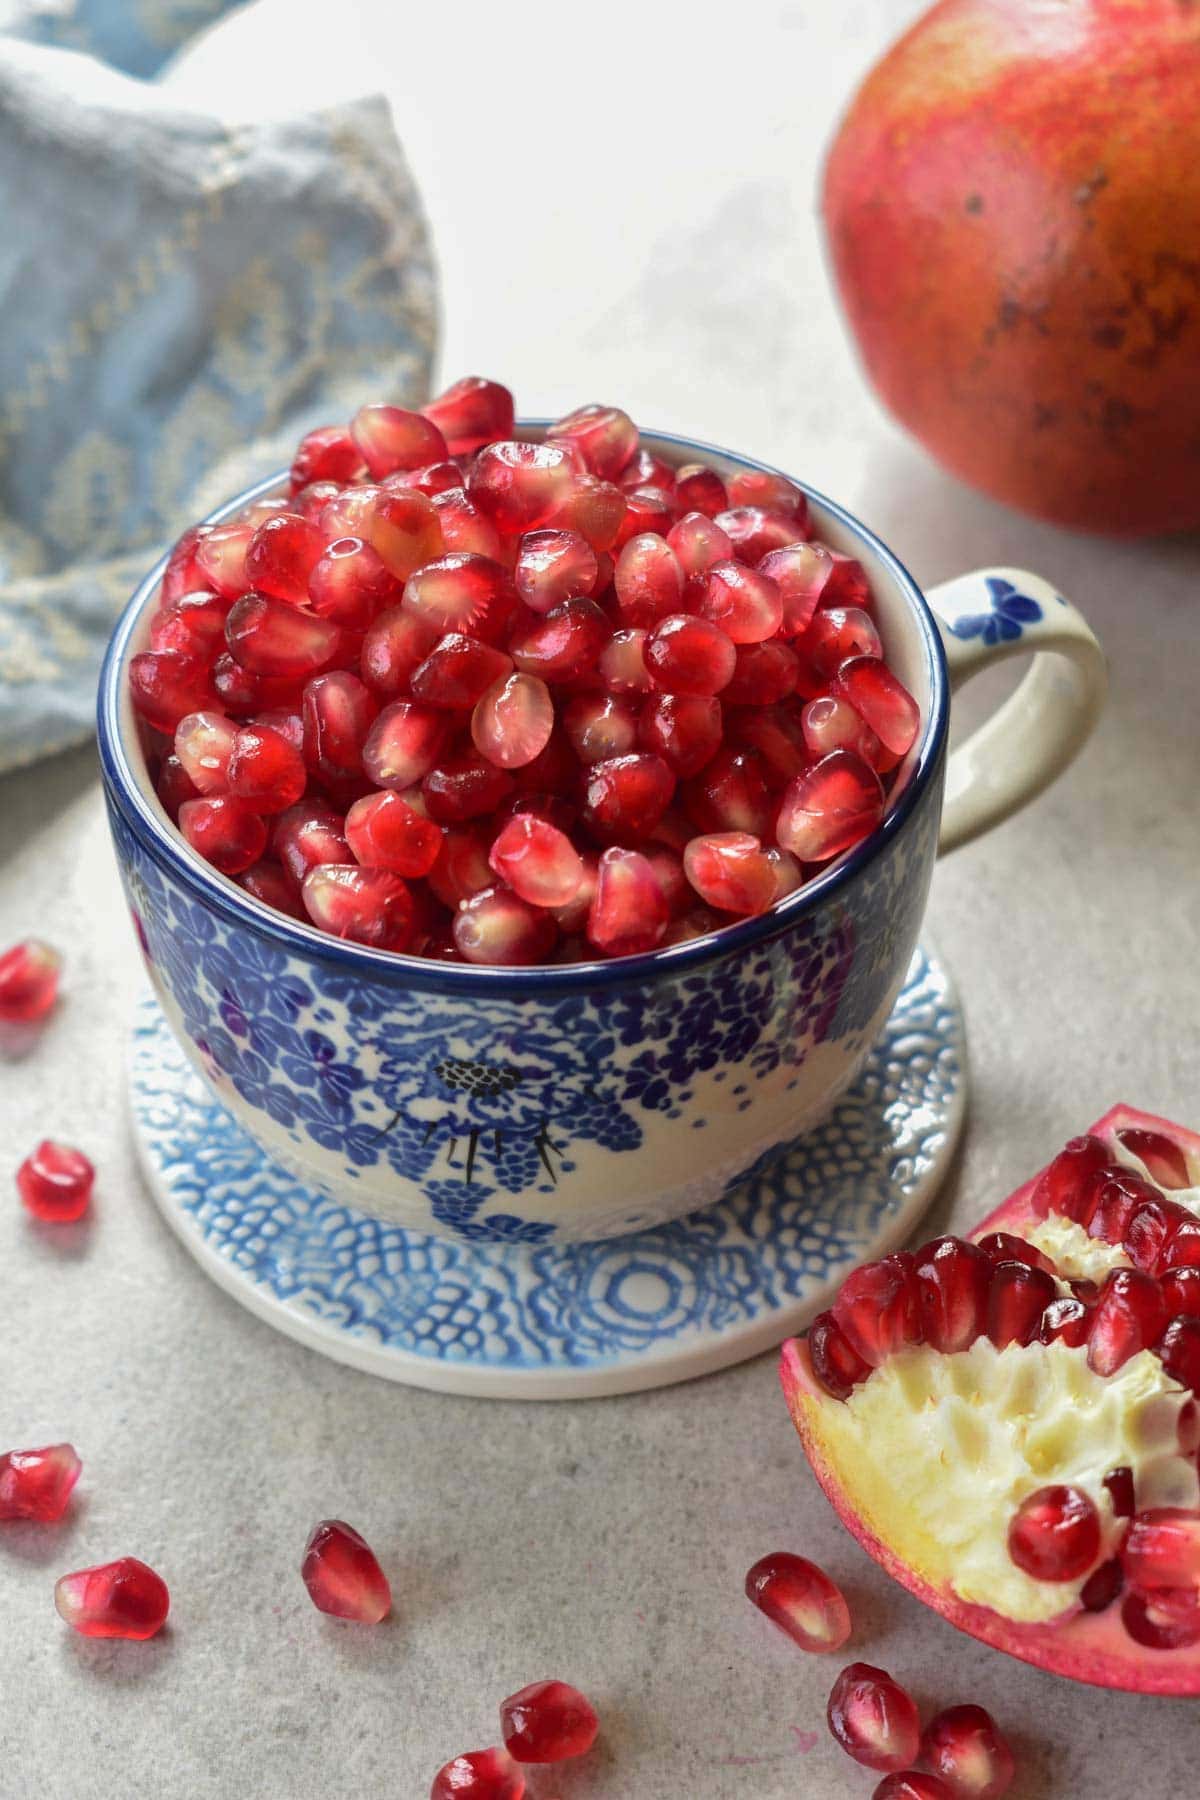 https://www.everyday-delicious.com/wp-content/uploads/2021/01/how-to-cut-and-seed-a-pomegranate-jak-otworzyc-granat-1.jpg